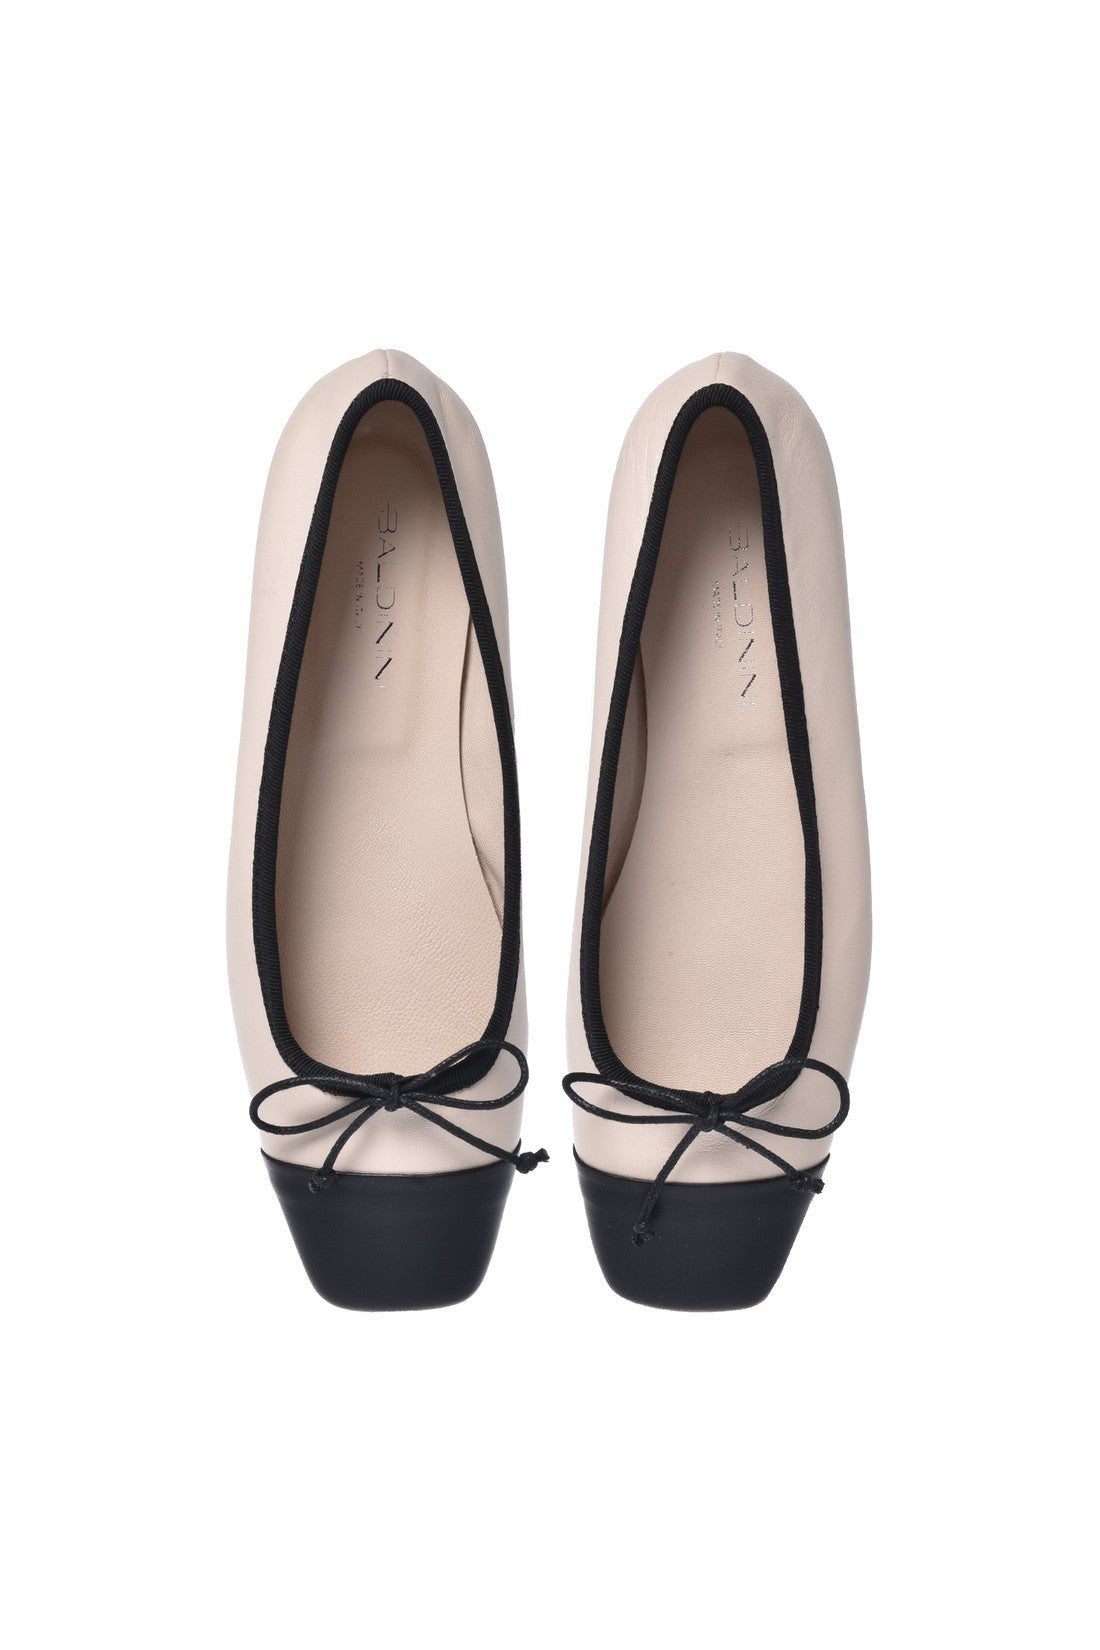 BALDININI-OUTLET-SALE-Ballerina-pump-in-black-and-beige-nappa-leather-Halbschuhe-ARCHIVE-COLLECTION-2.jpg